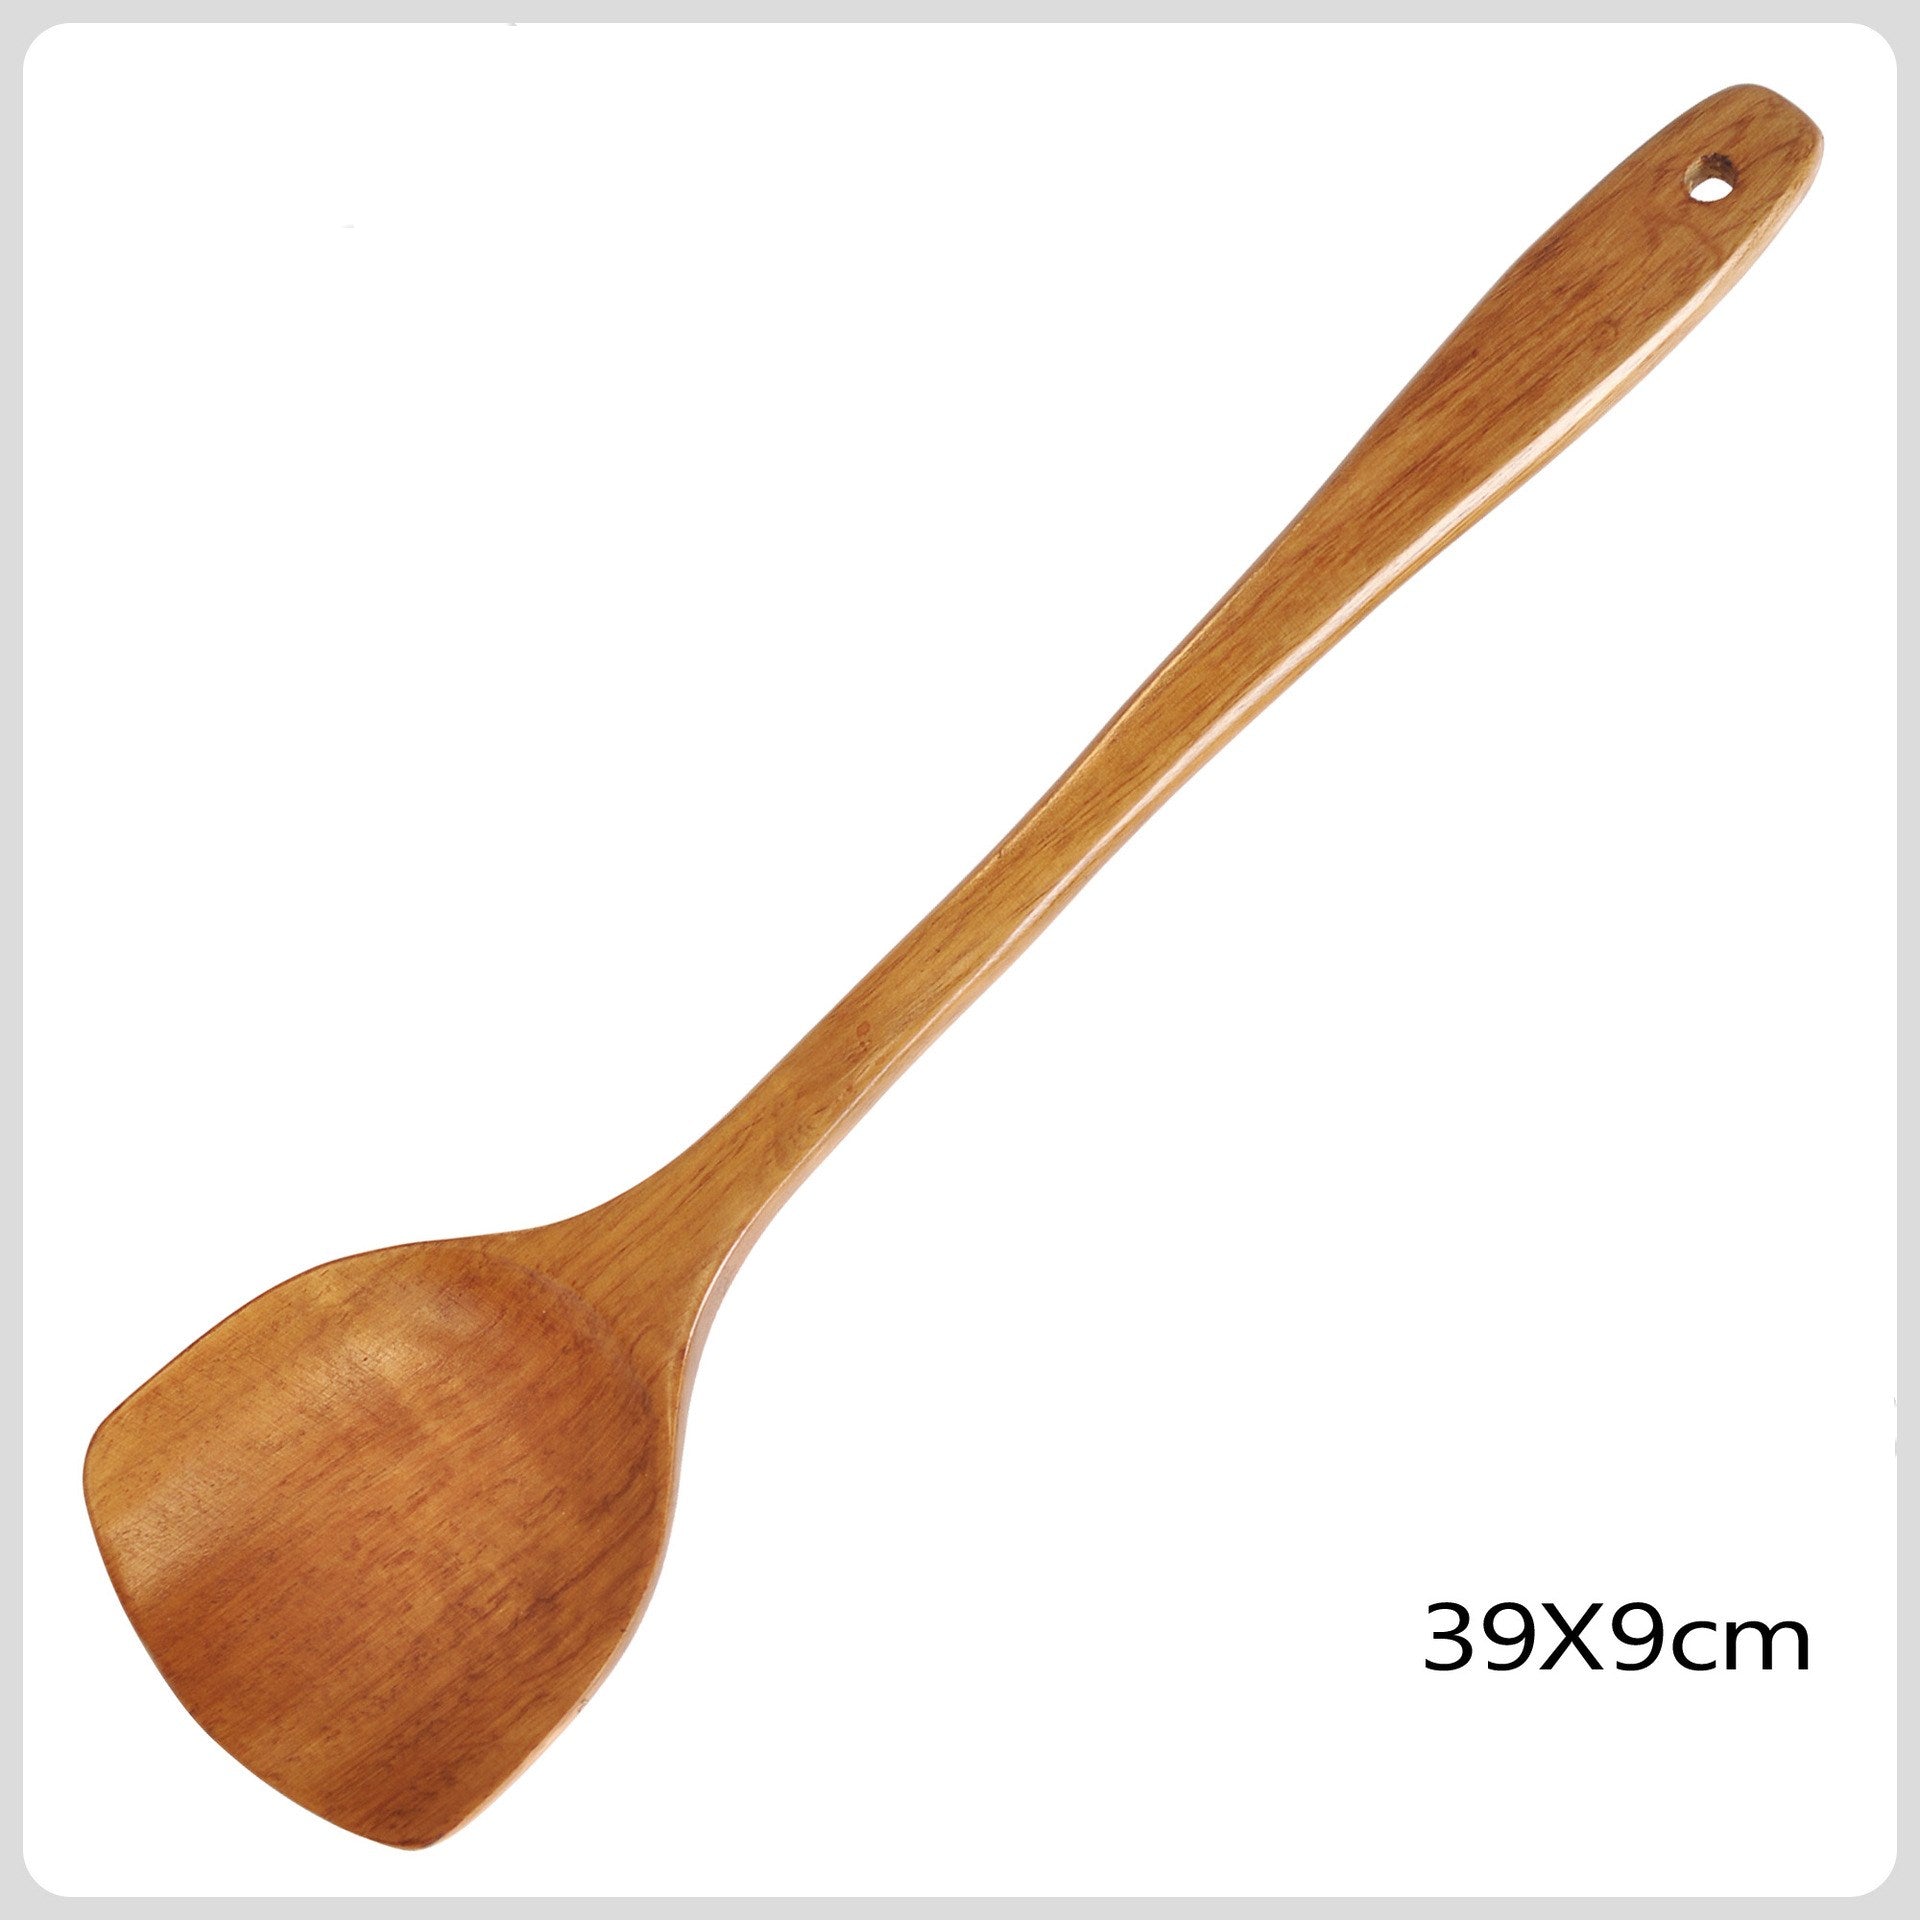 Special Wooden Spatula for Non-Stick Cookware - Handcrafted Cooking Utensil